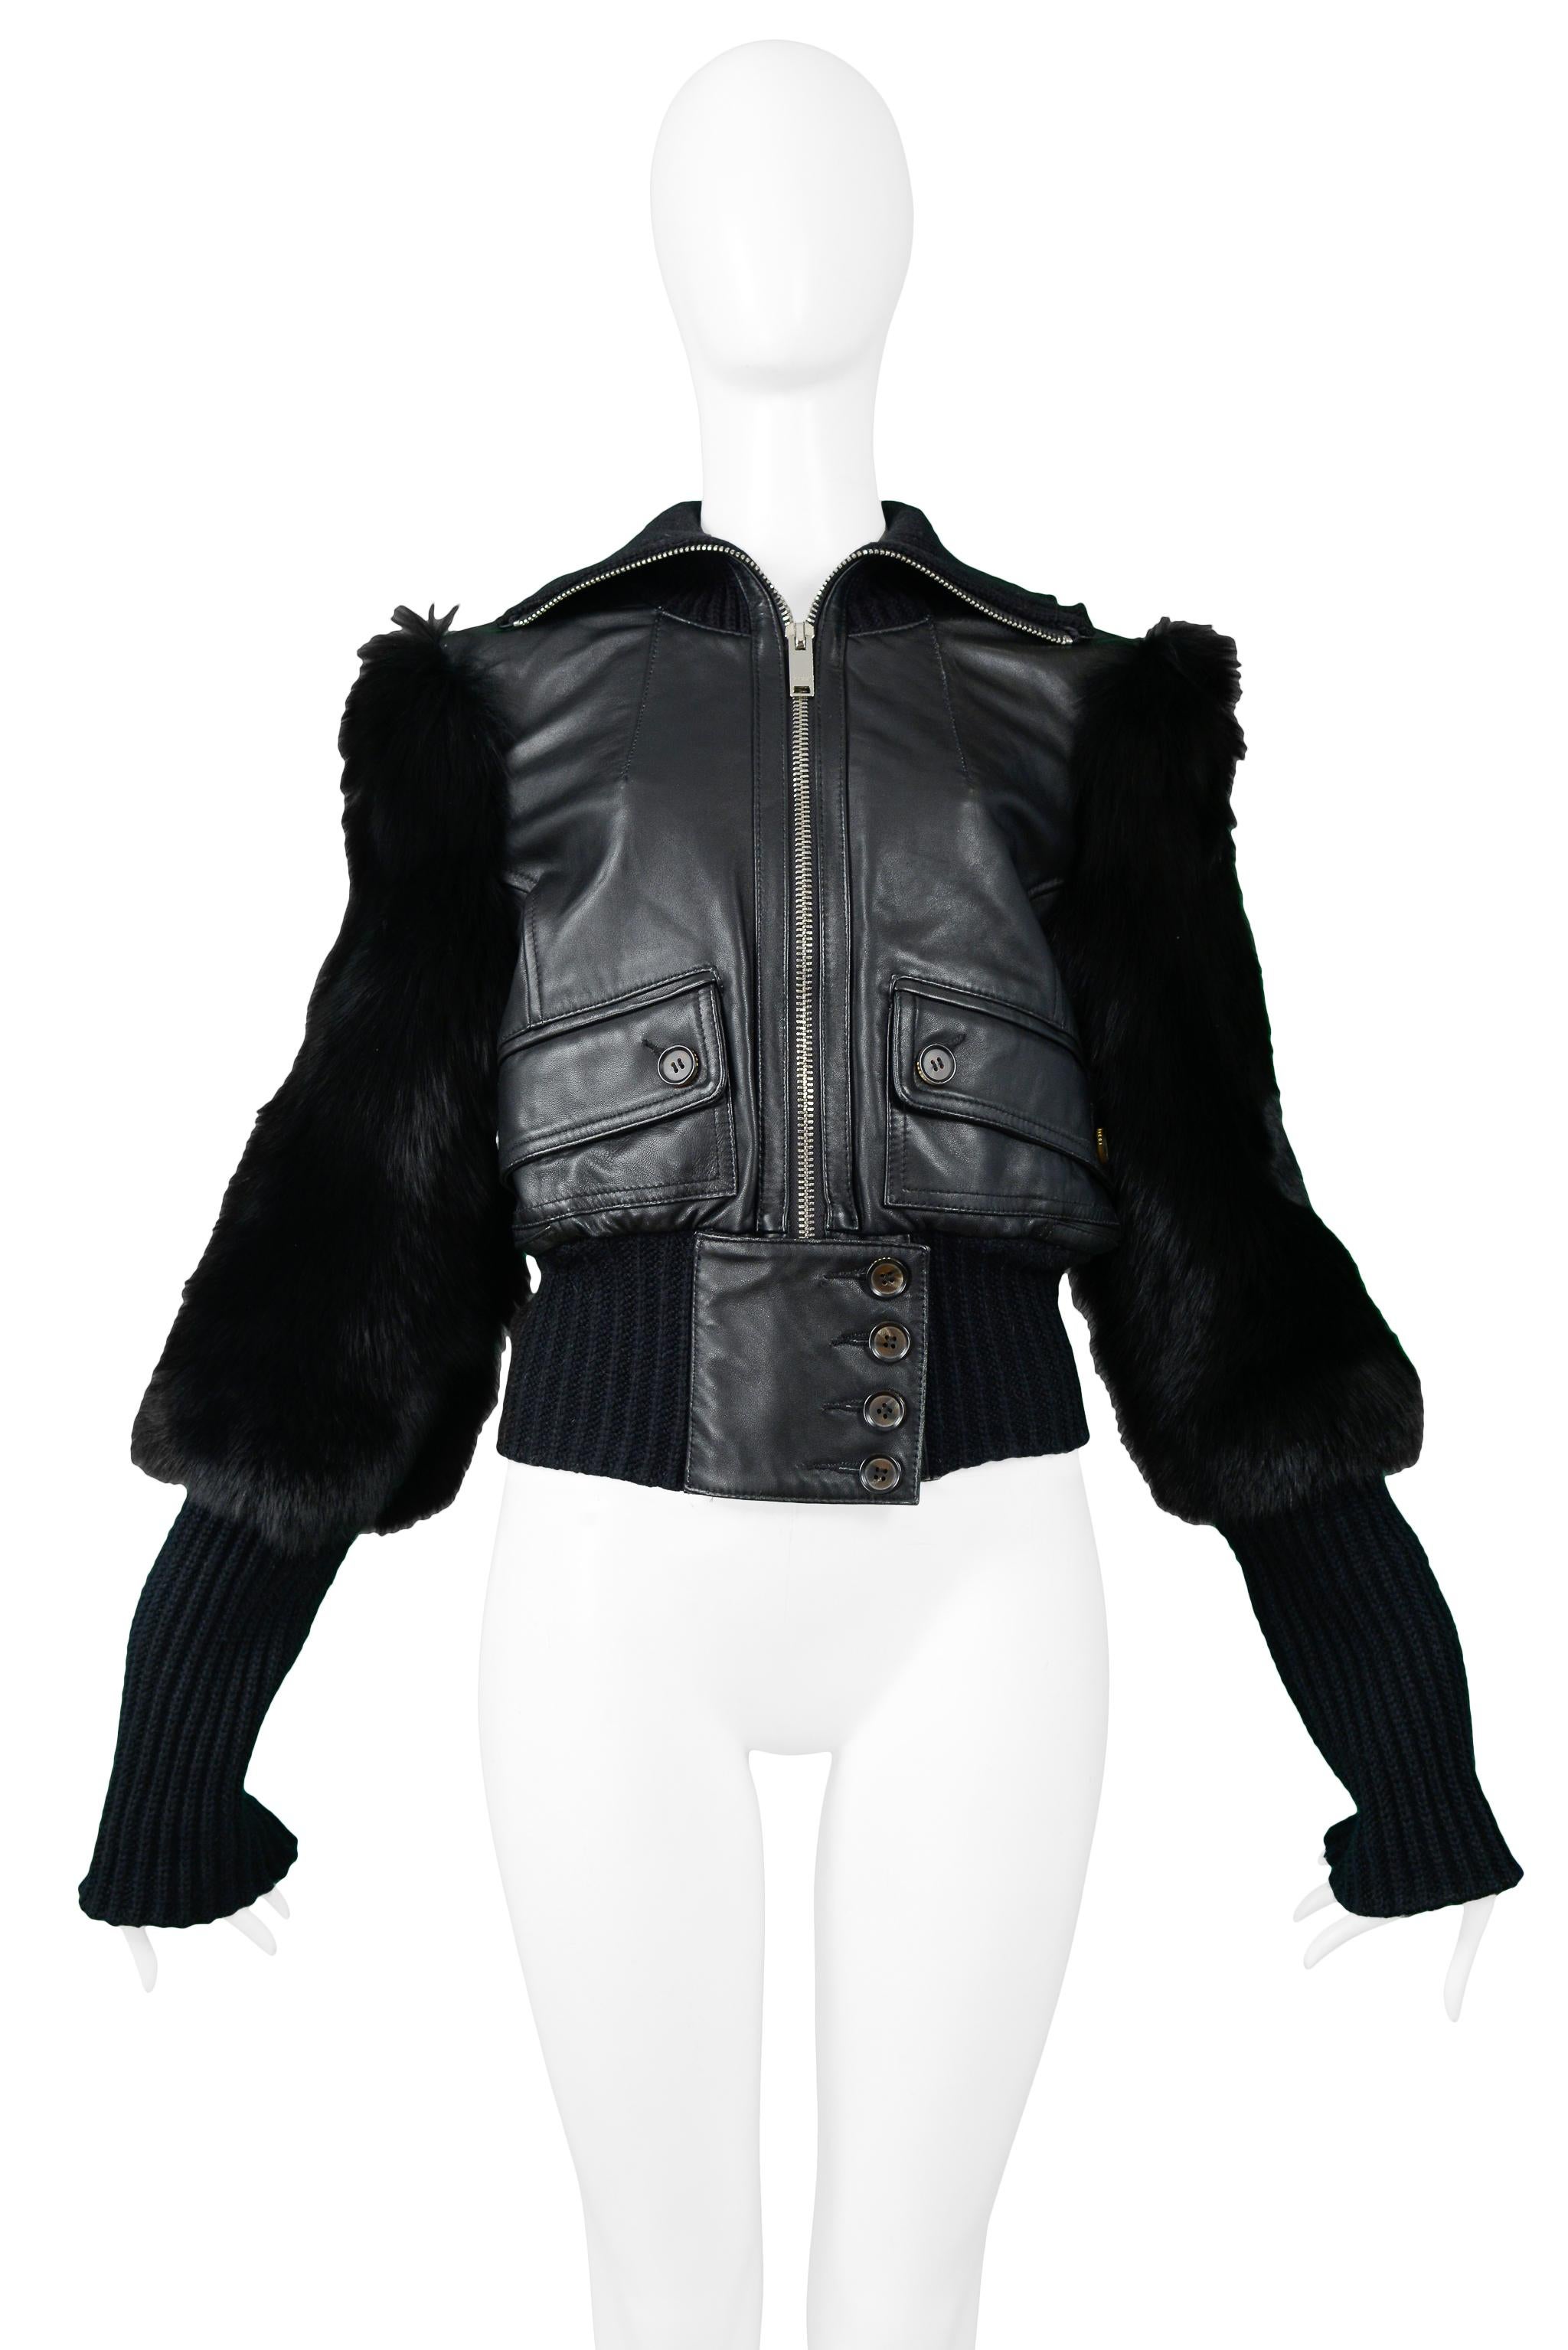 Resurrection Vintage is pleased to offer a vintage black leather and fox fur Tom Ford for Gucci mini-bomber jacket featuring a zipper and button closure, knit waistband and cuffs, fur sleeves, button-flap pockets, and high neck. 

Gucci
Designed by